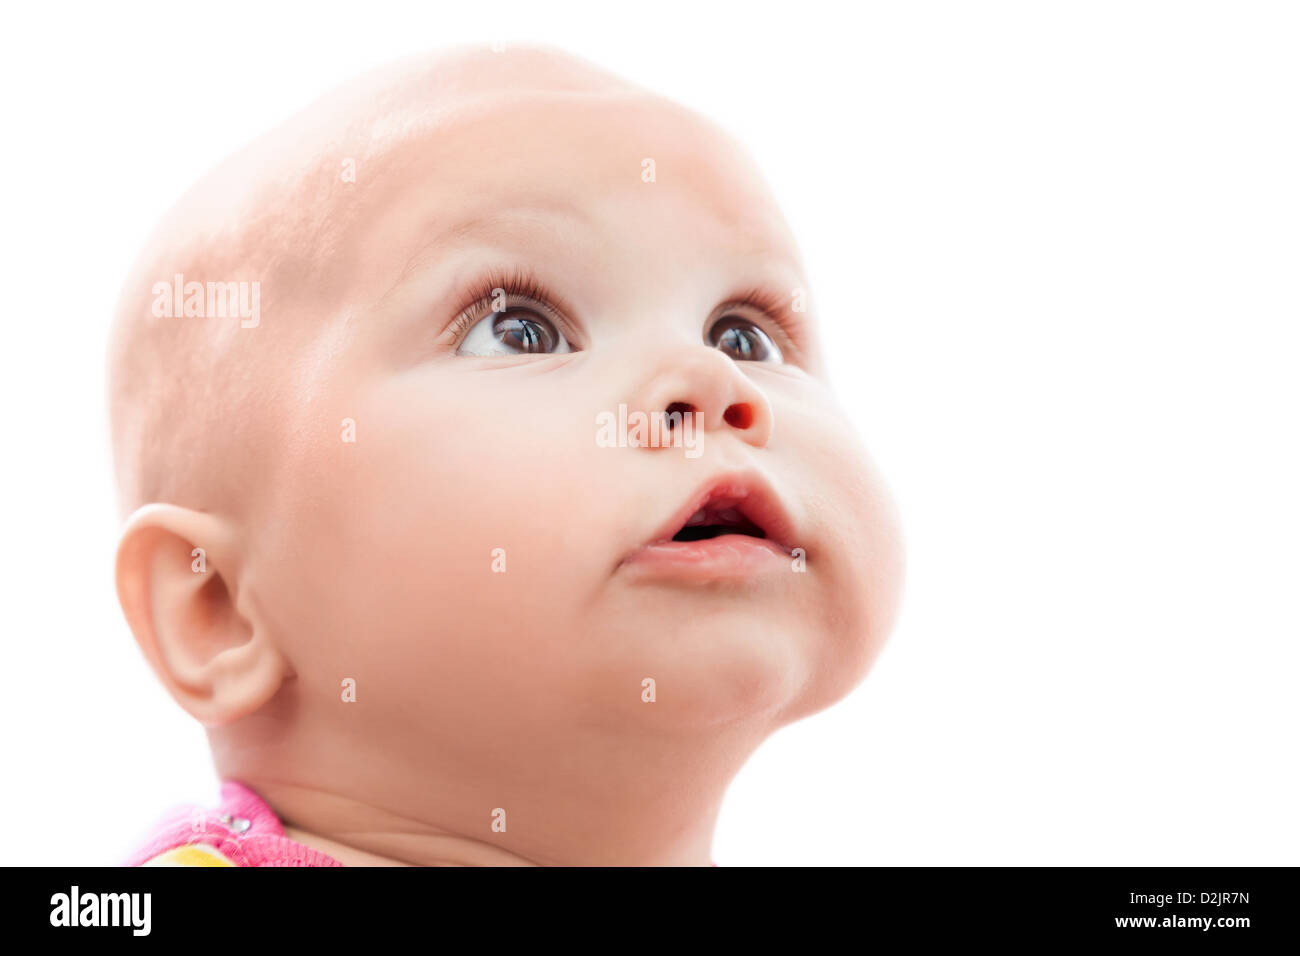 Isolated on white portrait of a little nice Caucasian baby surprise looking up Stock Photo